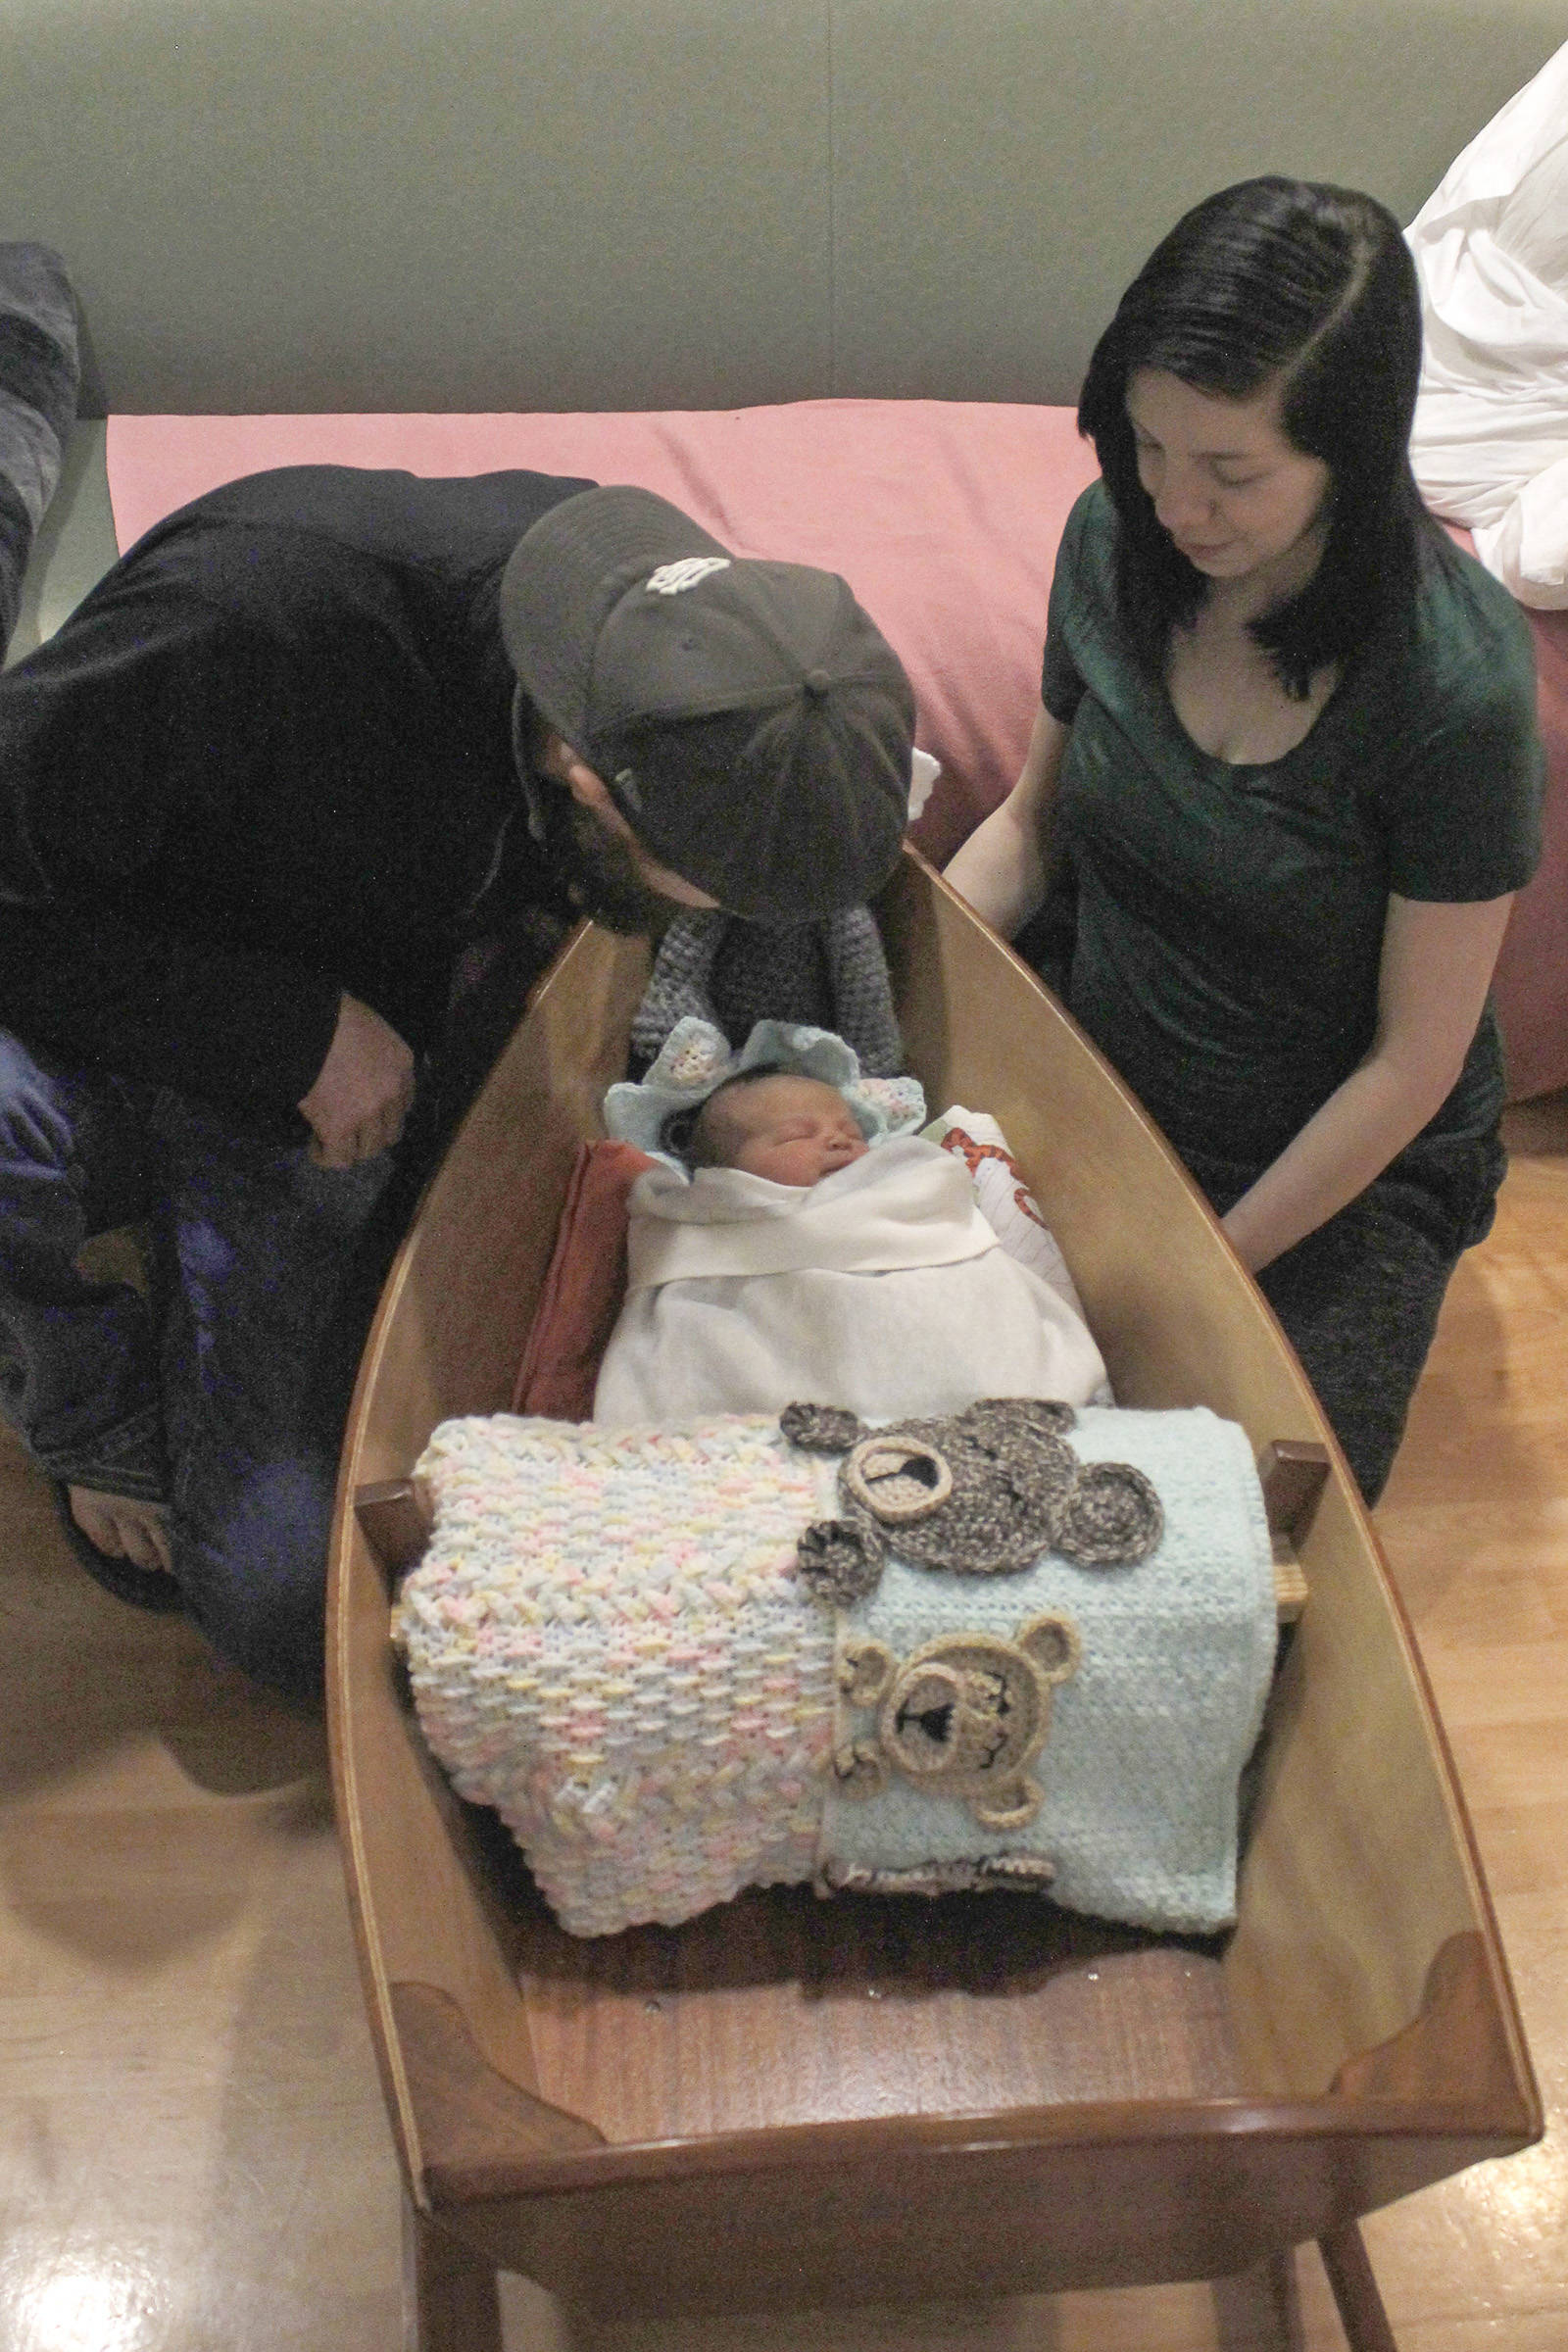 Yakutat residents Cody Kunau and Samantha Munoz sit with their baby Saige Roisin Kuneau on Friday, Jan. 4 at Bartlett Regional Hospital. Saige was the first baby born at the hospital this year, and received a boat carved by BRH Emergency Room Dr. Lindy Jones. (Alex McCarthy | Juneau Empire)